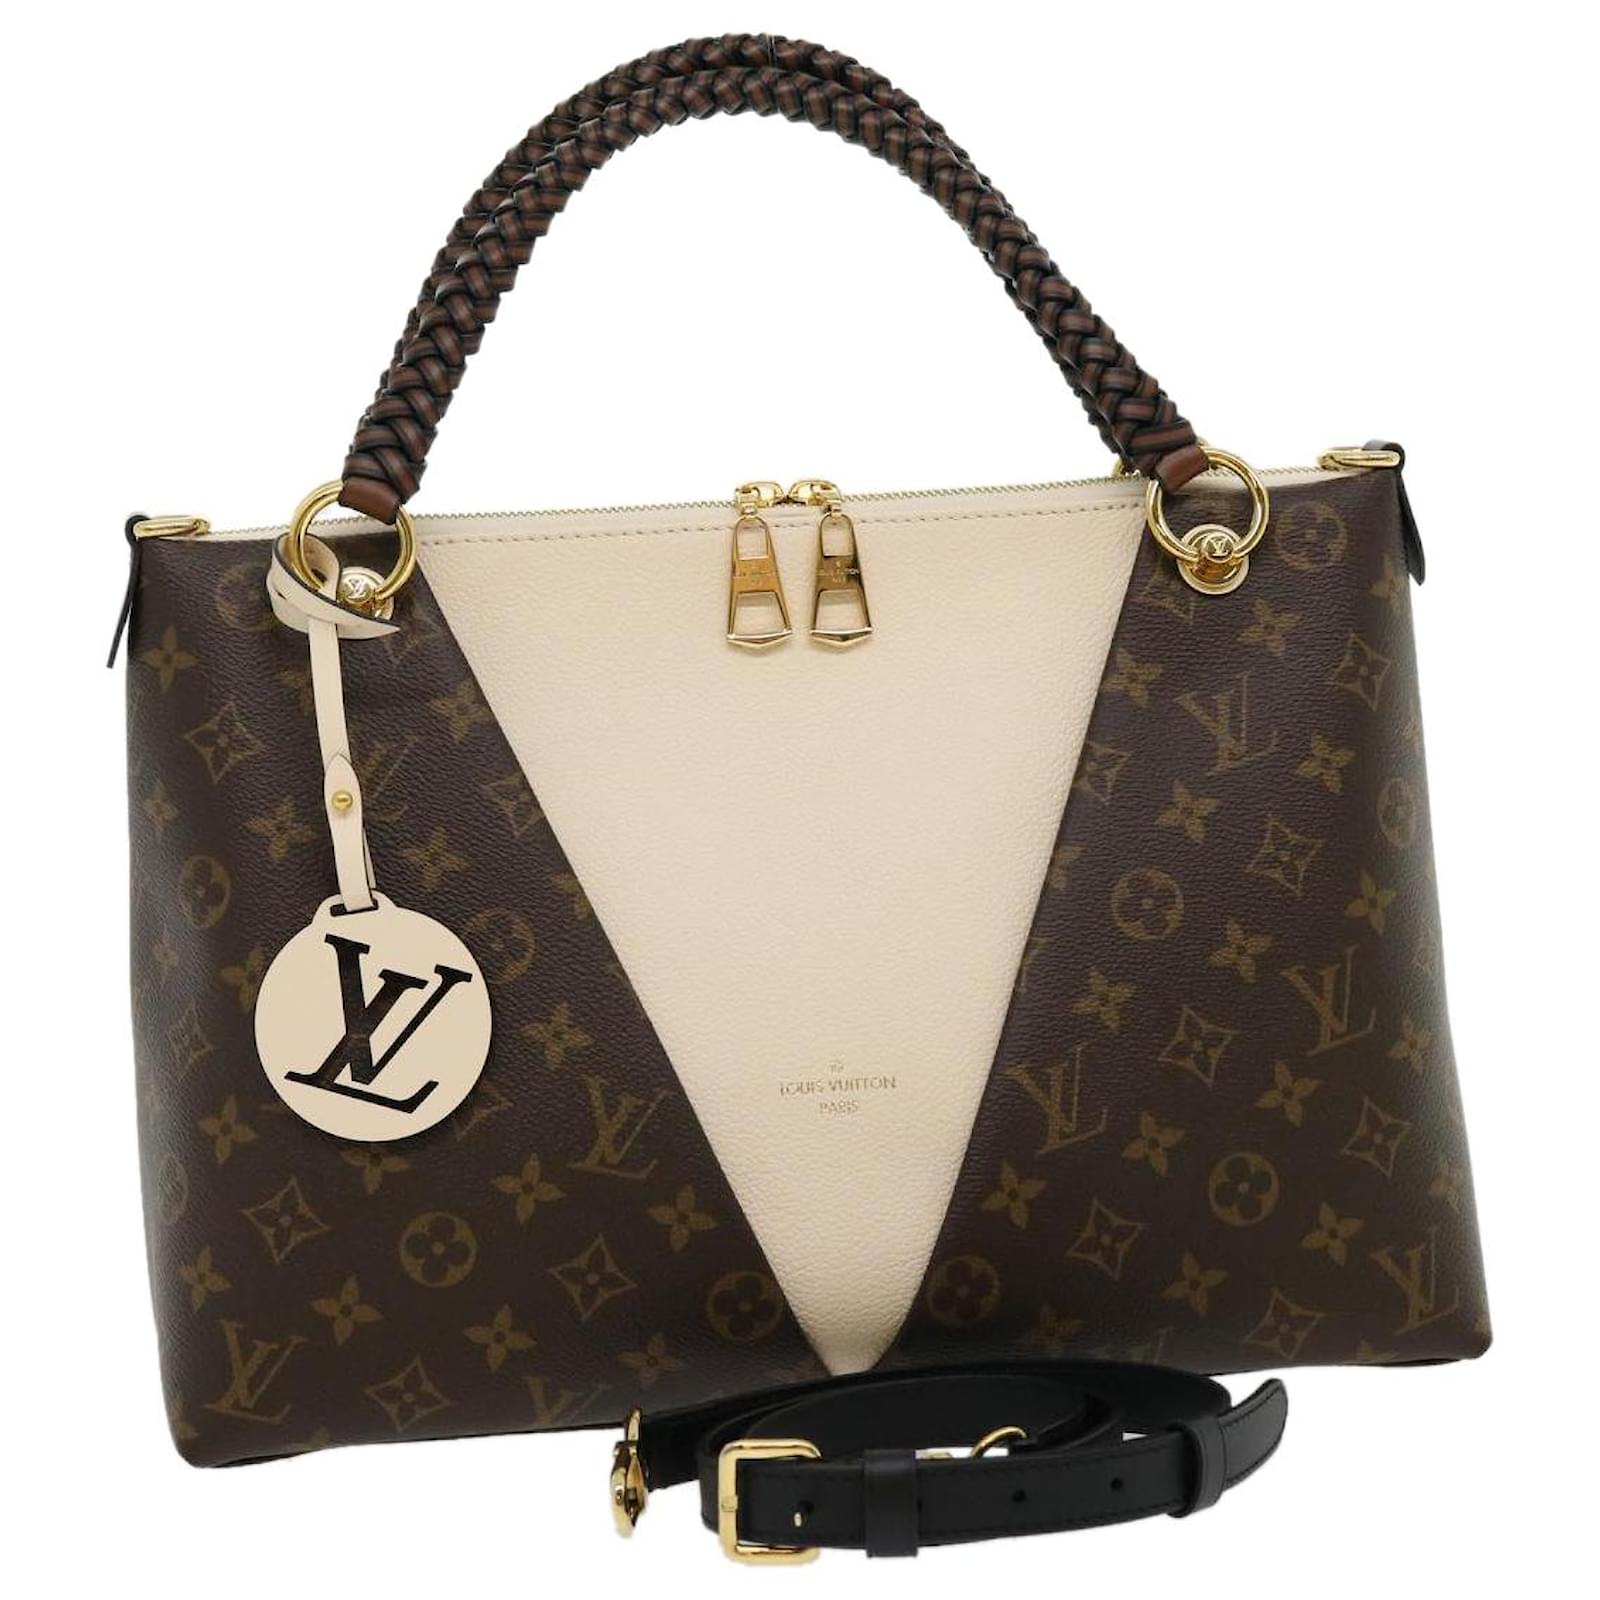 LOUIS VUITTON Neverfull MM Wild At Heart Monogram Giant Tote Bag Creme